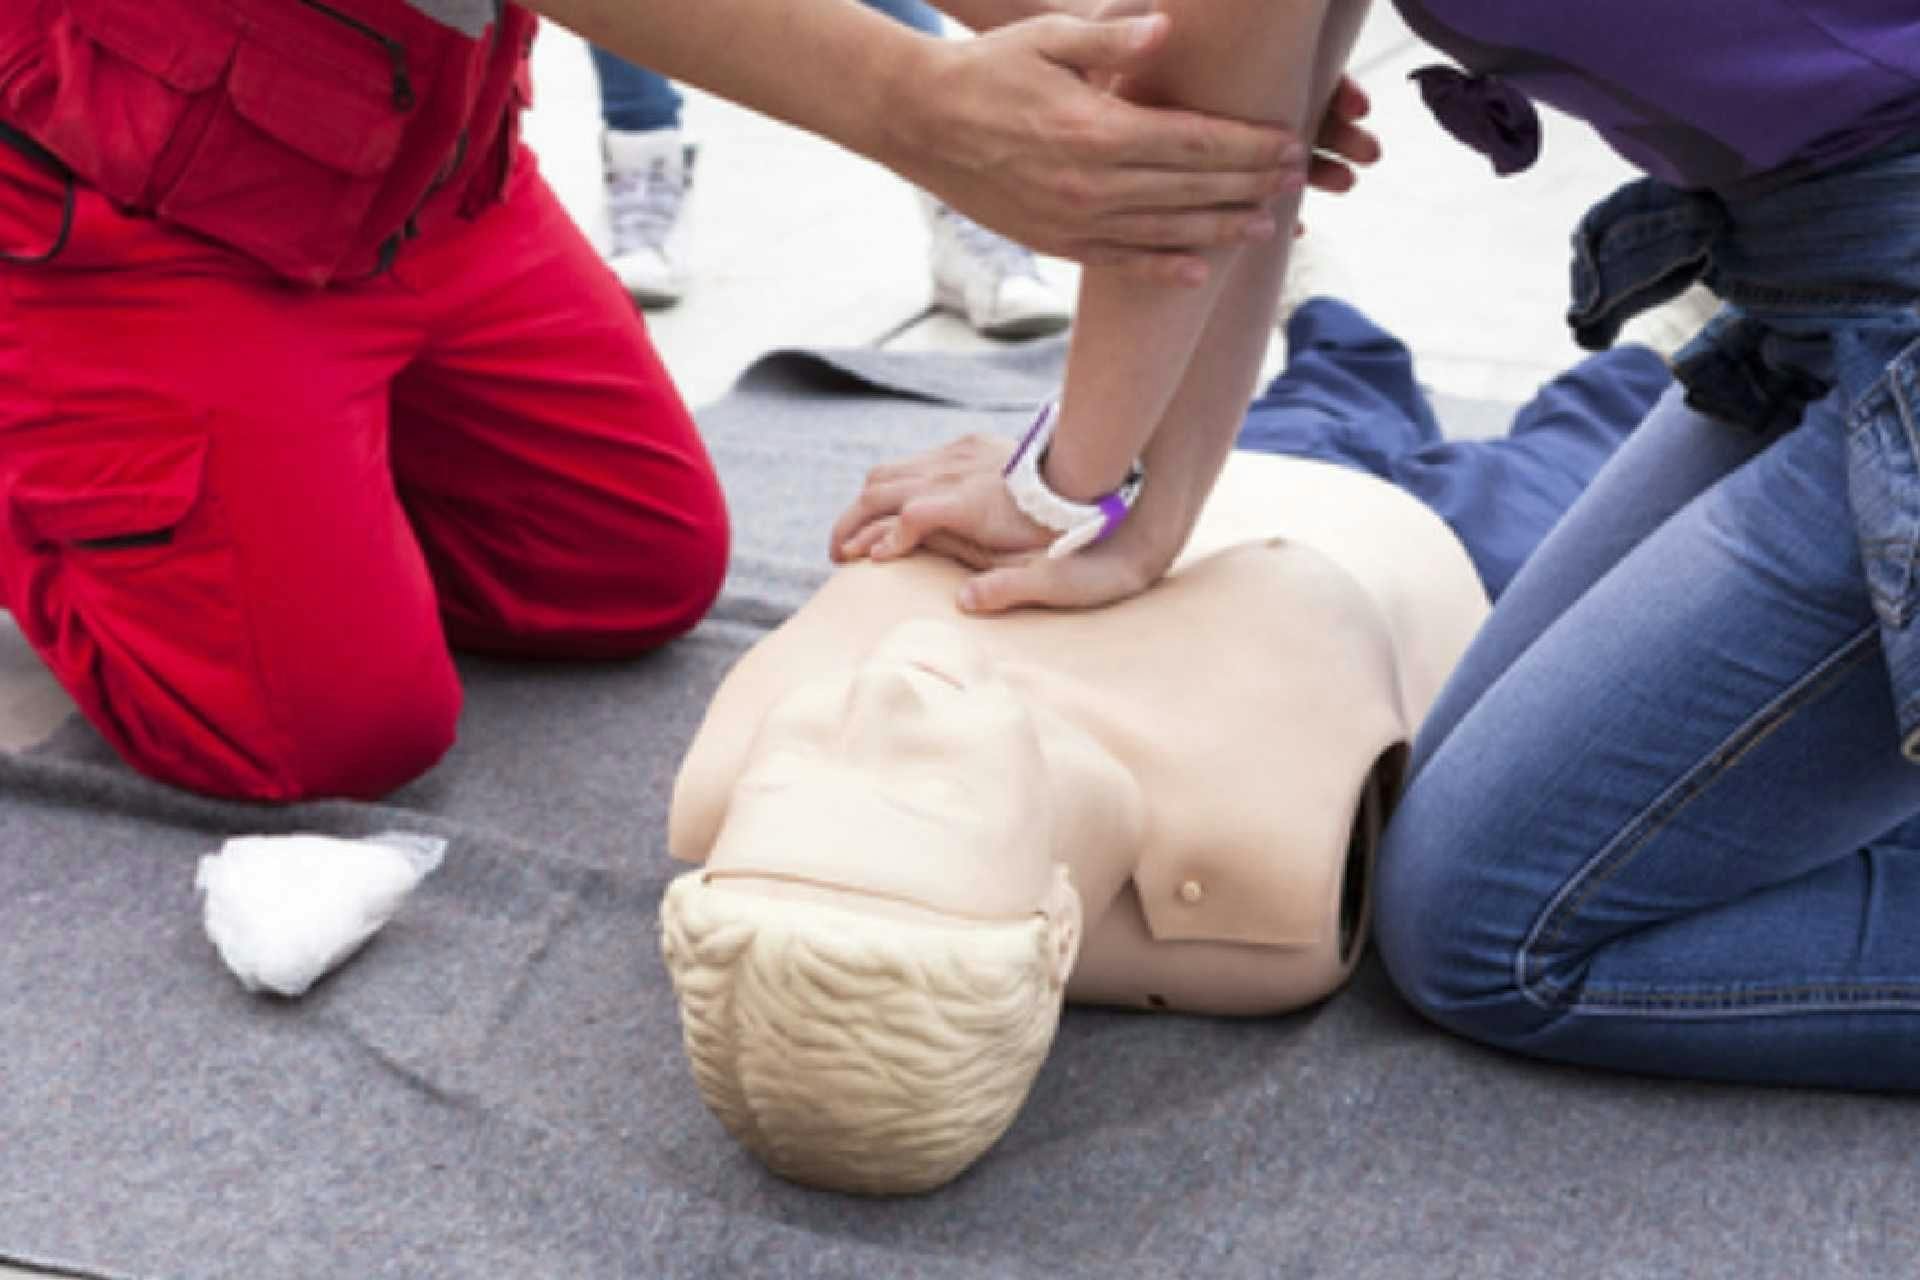 First Aid Response